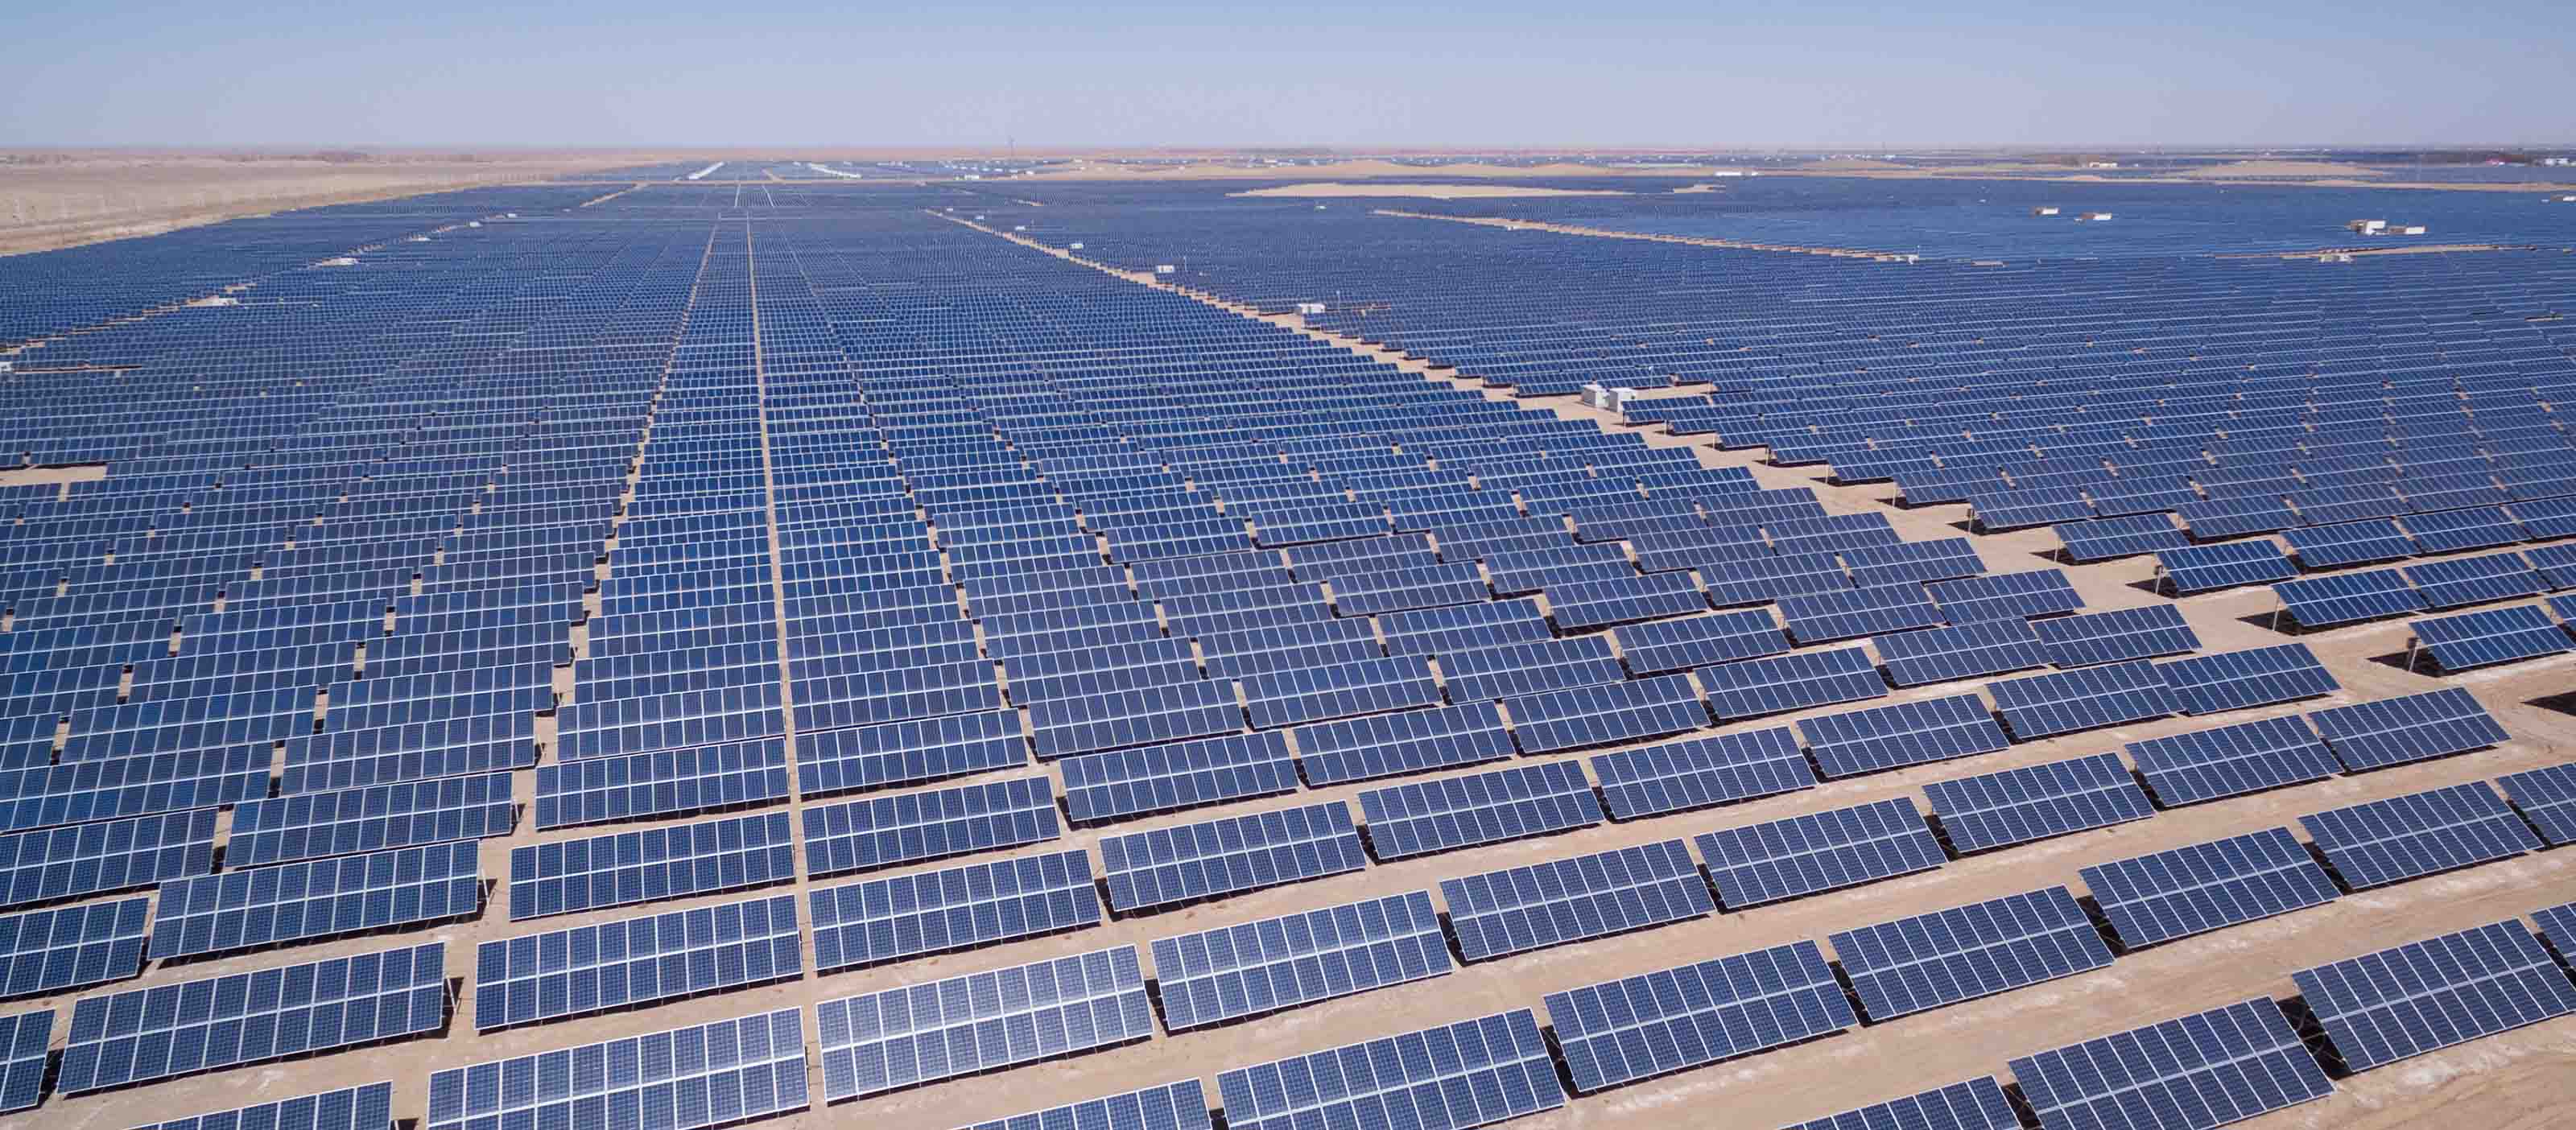 Solar panels in a desert terrain are watched for performance by GE's APM software